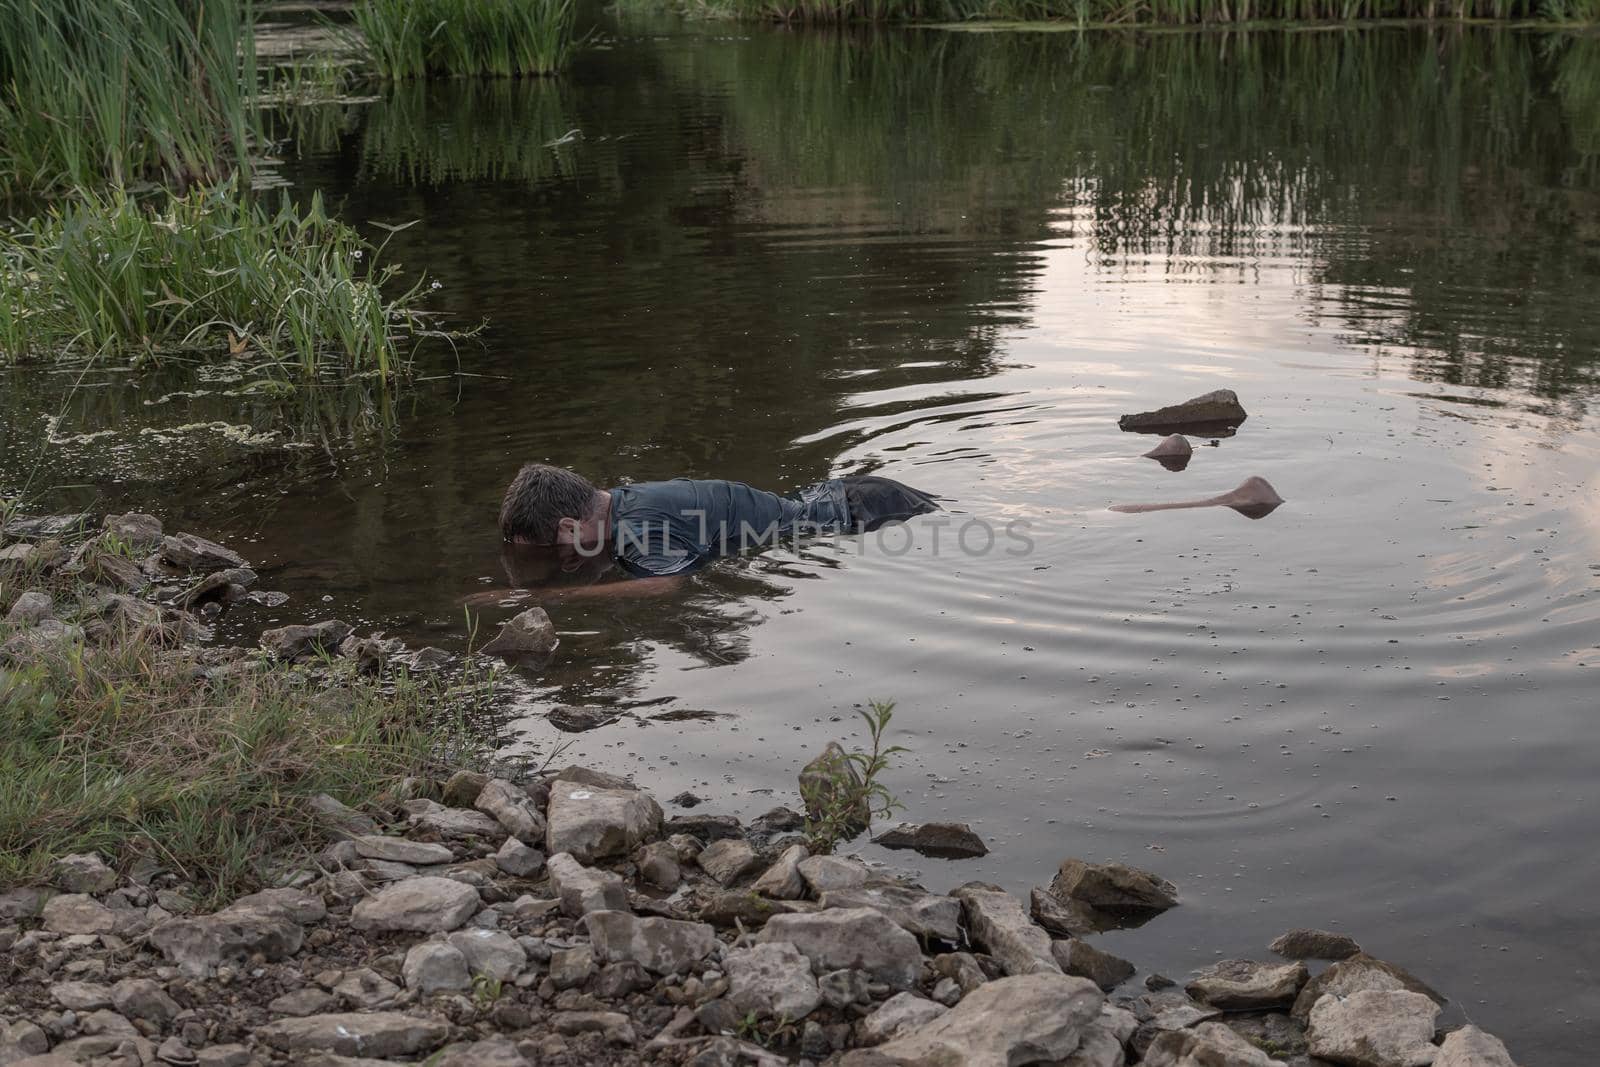 the body of a man who drowned lies face down in the water, the lifeless body of a murdered young man on the river by studeg83